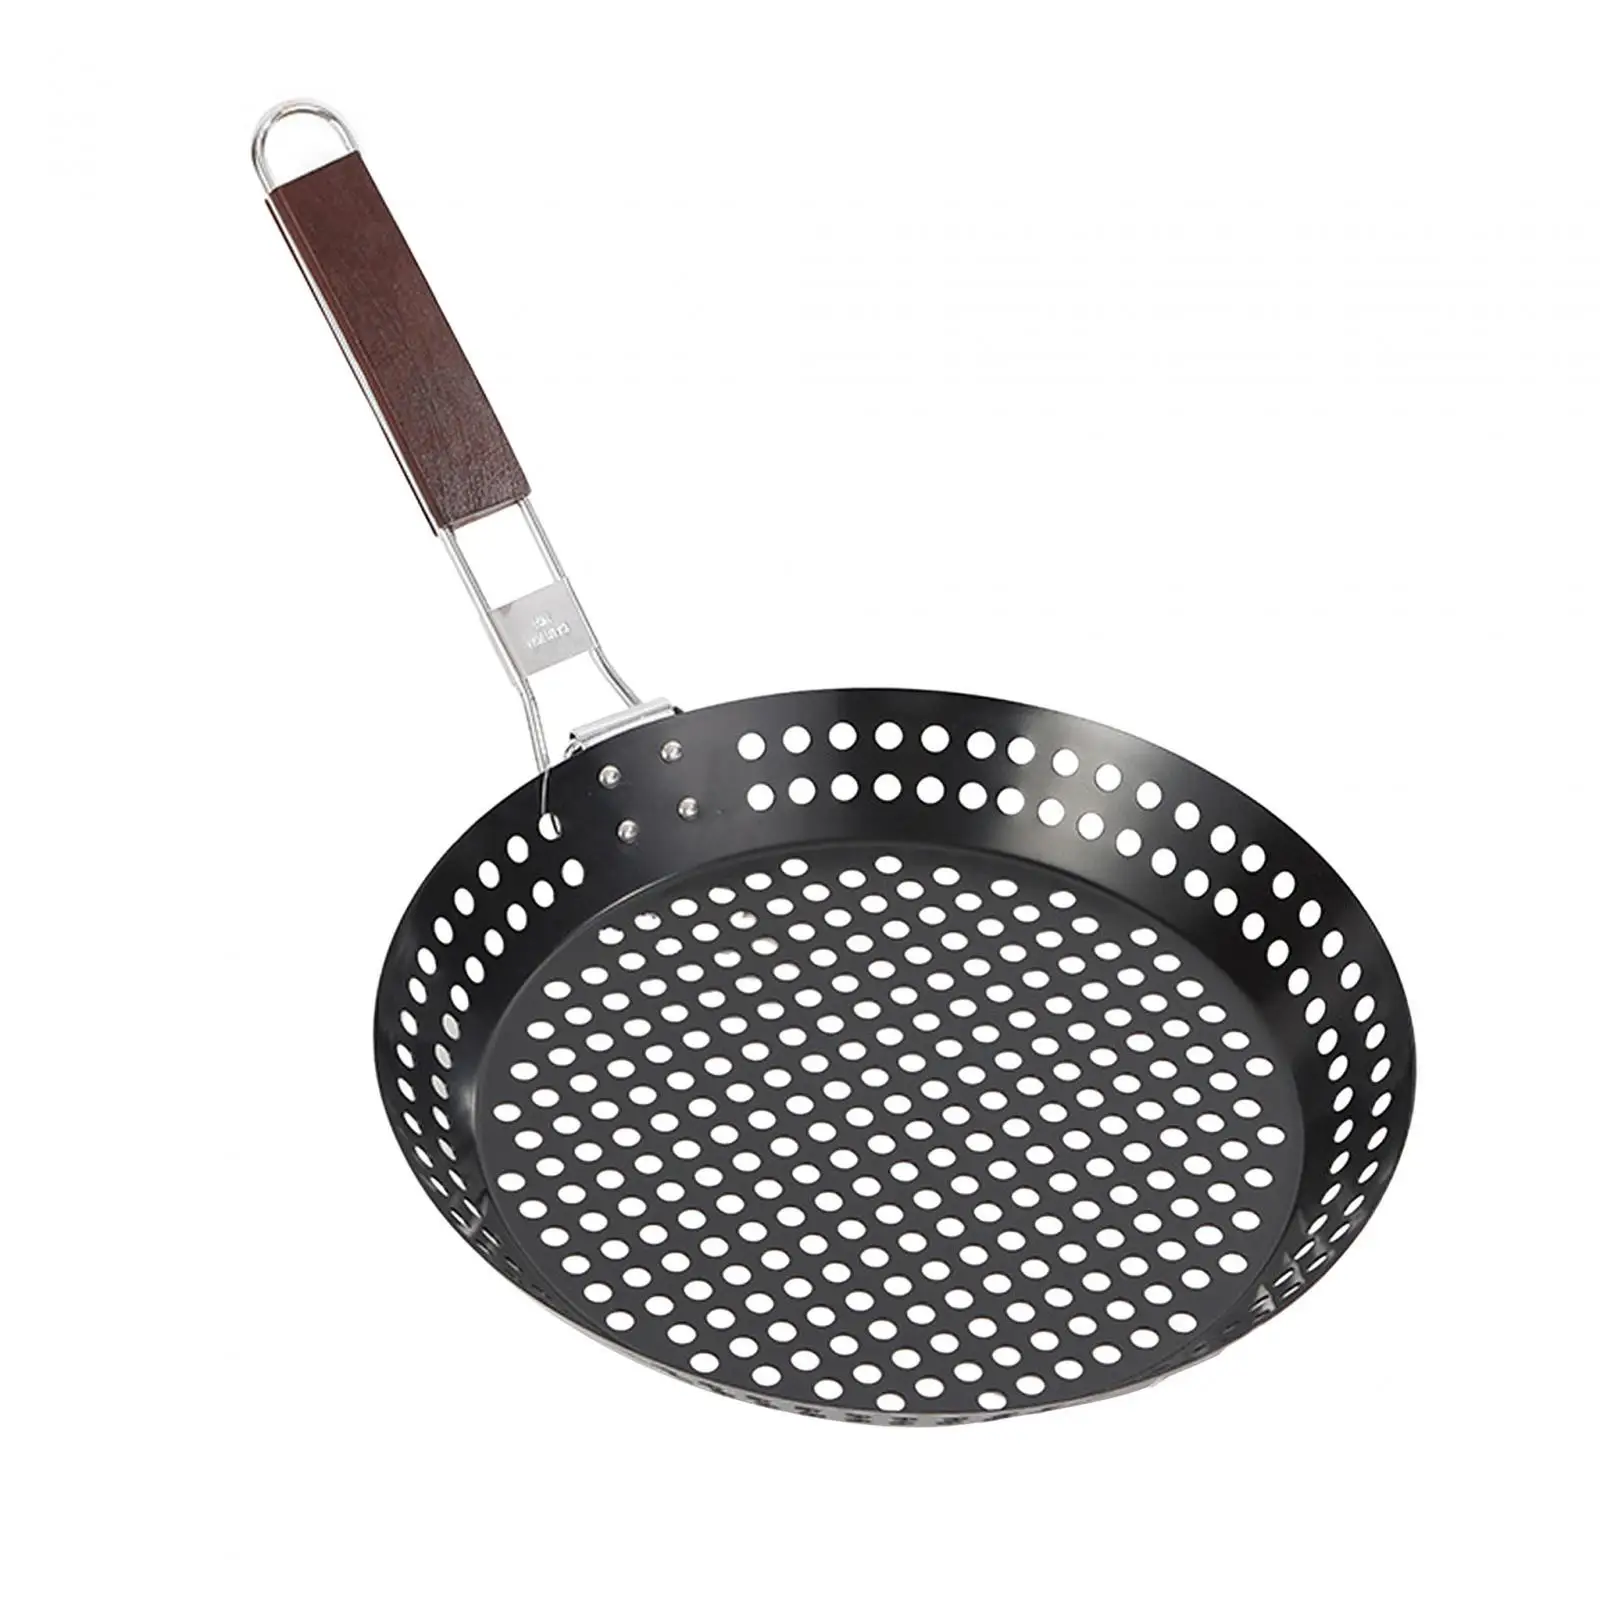 Grilling Skillet Durable Nonstick Coating Perforated Cooking Pan Frying Pan for Picnics Home Kitchen Utensils Camping Restaurant